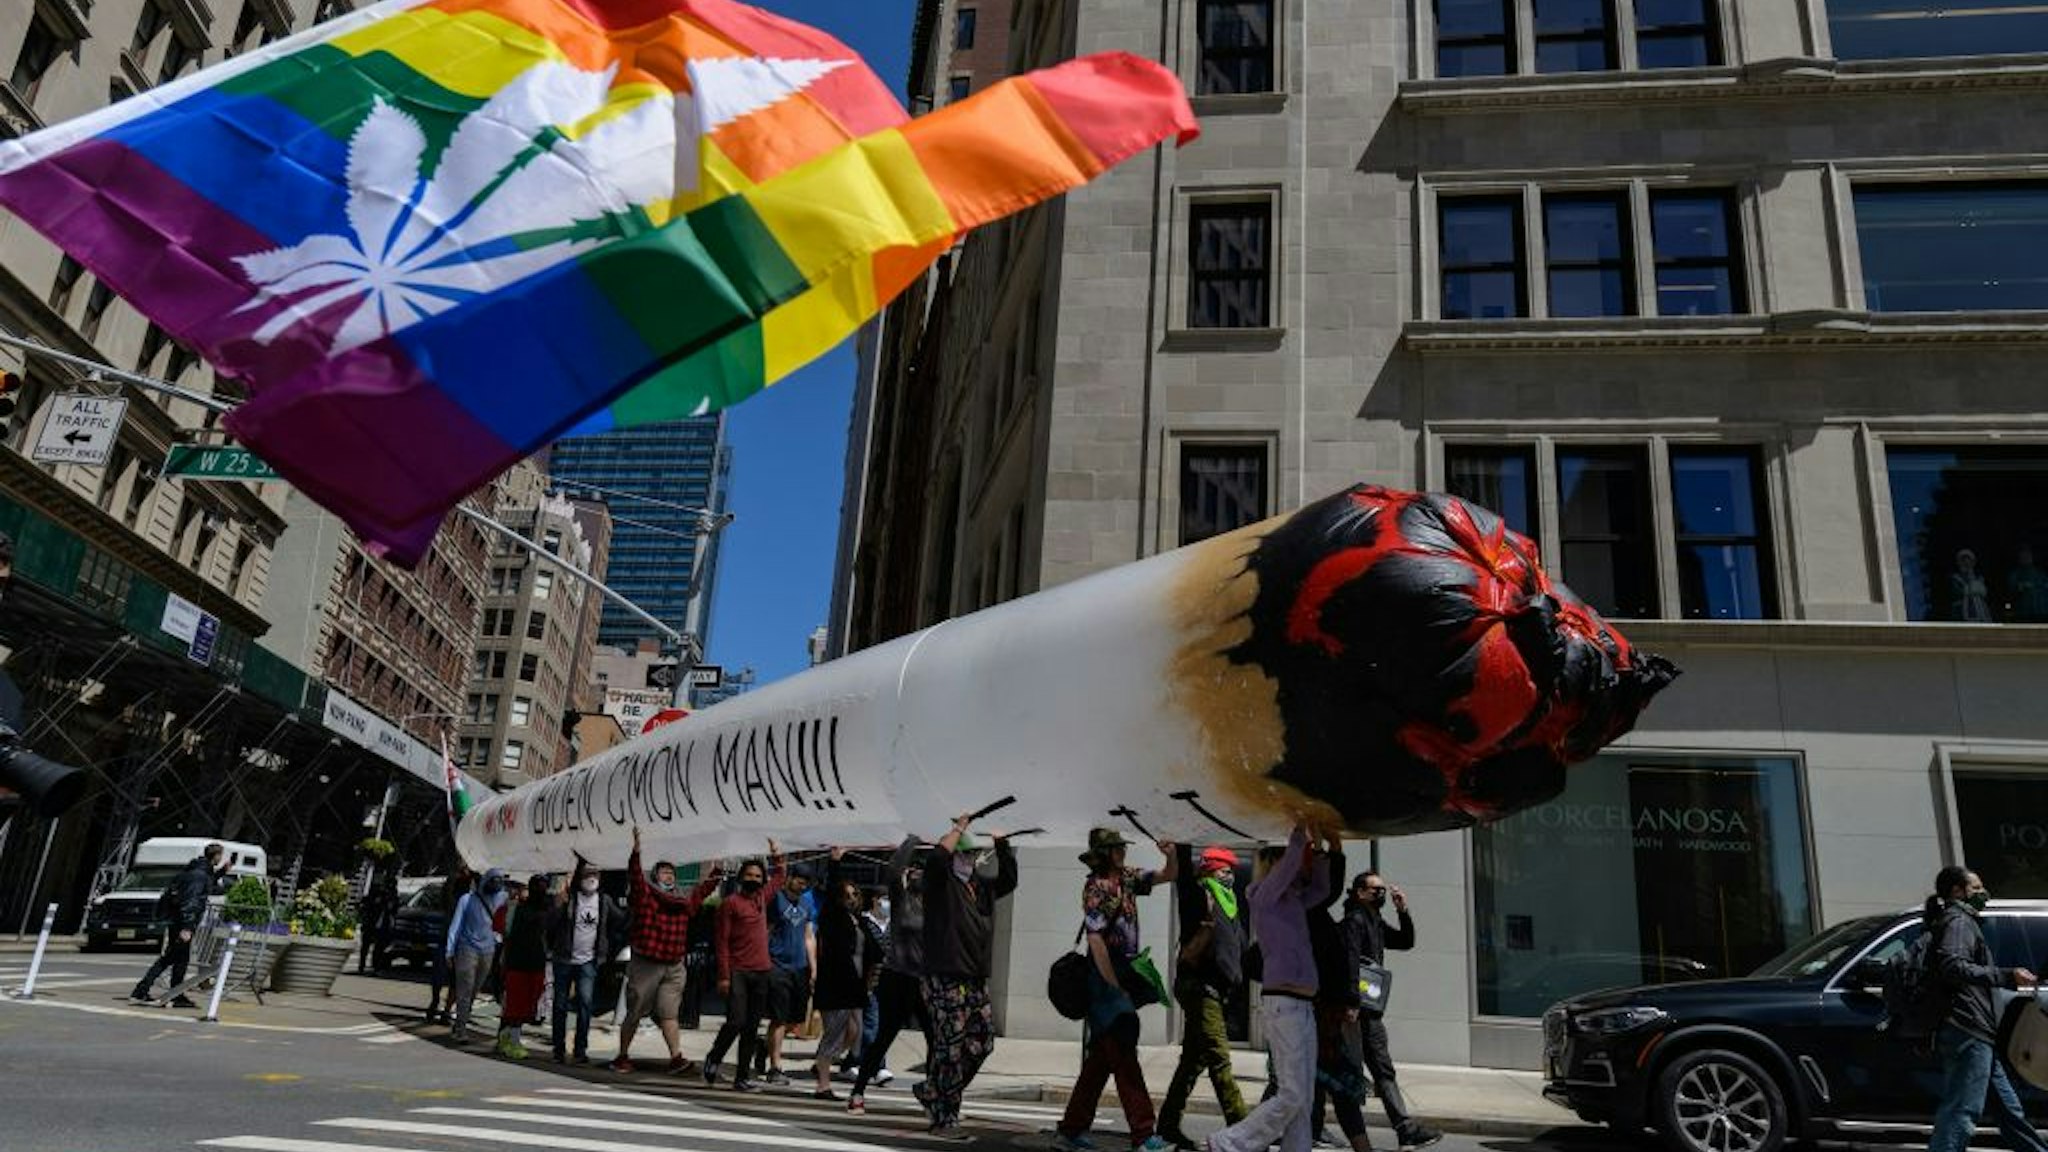 Demonstrators march in the annual NYC Cannabis Parade & Rally in support of the legalization of marijuana for recreational and medical use, on May 1, 2021 in New York City.